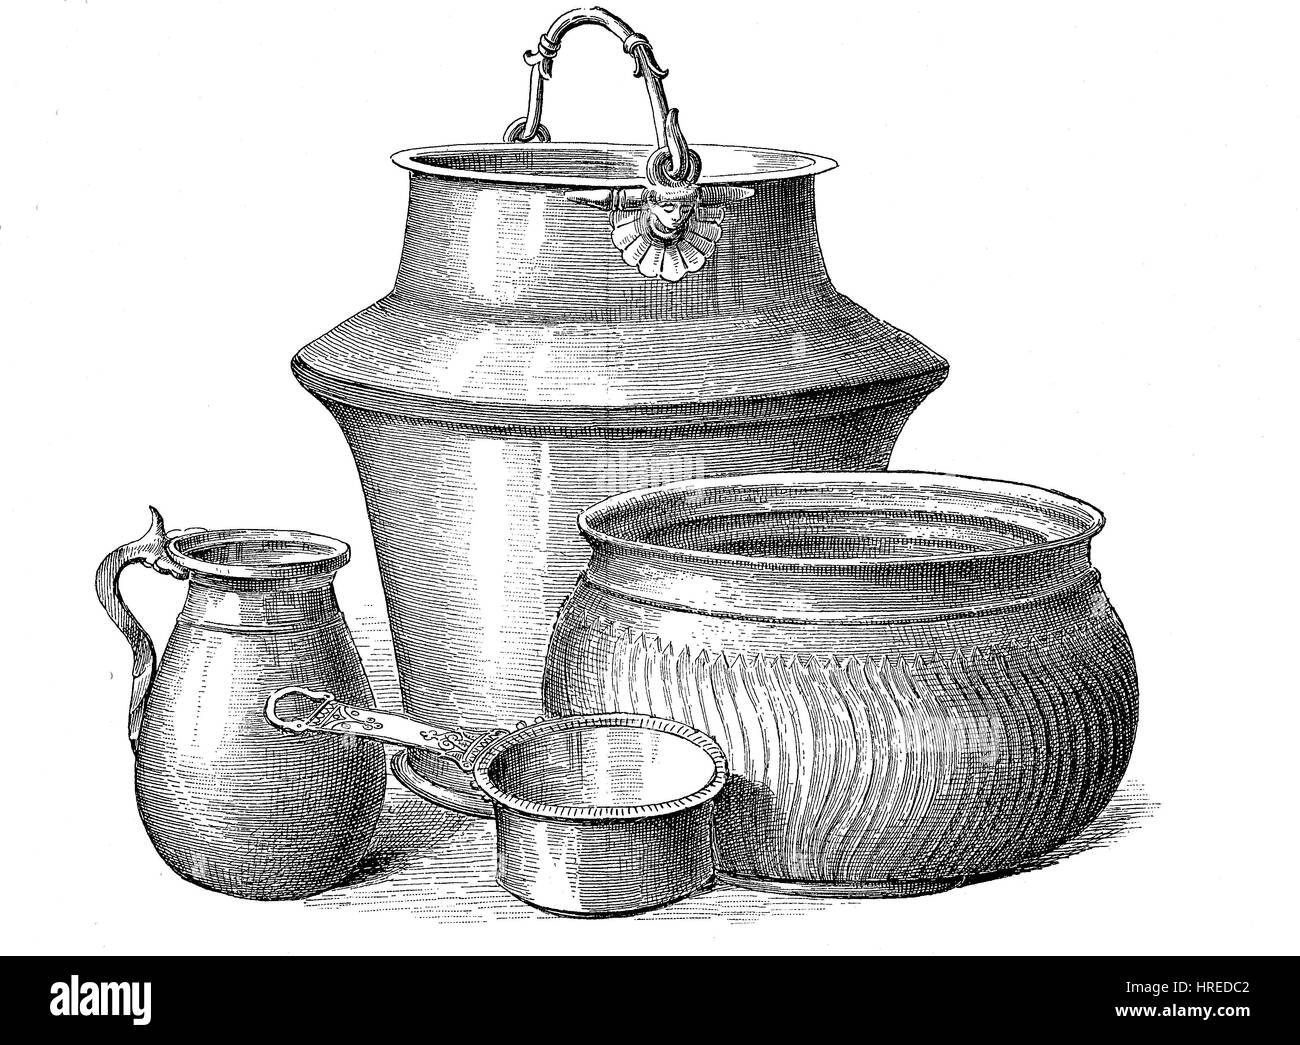 Vessels from the Roman period, a bronze jug from the left, a large bucket of bronze with handles, bronze casseroles and a large kettle-like, ribbed bronze vessel, Germany, reproduction of an woodcut from the 19th century, 1885 Stock Photo